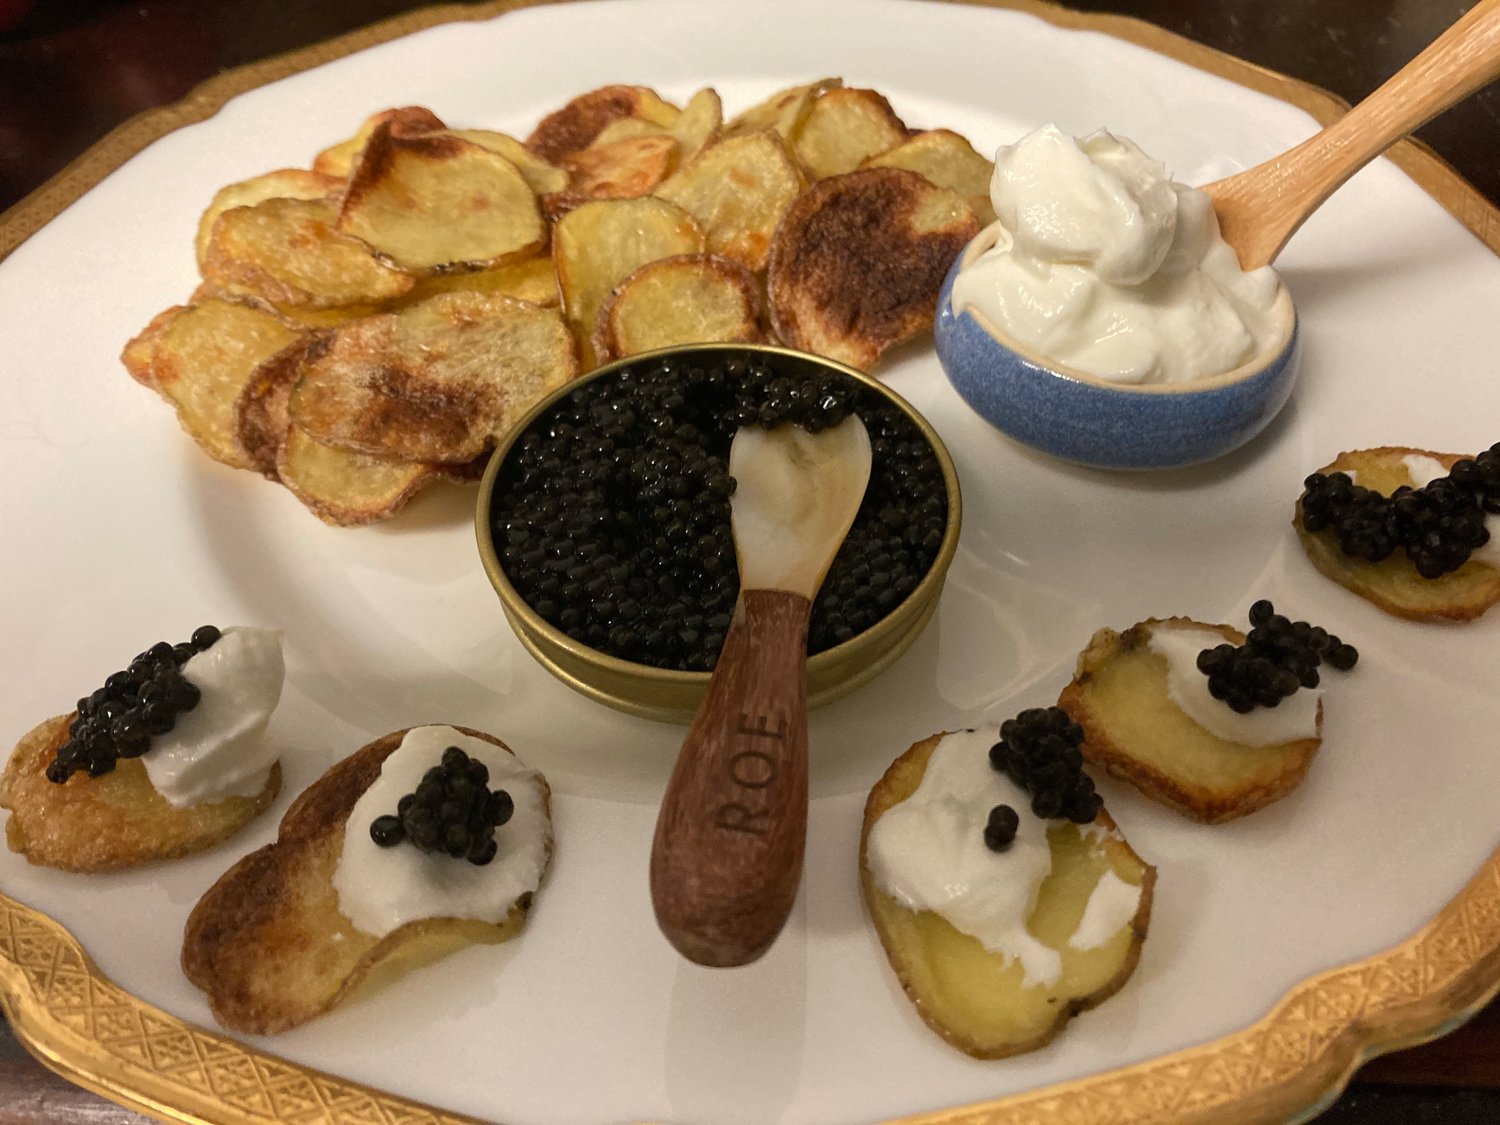 These oven-baked potato chips are the perfect foundation for R O E caviar and sour cream.